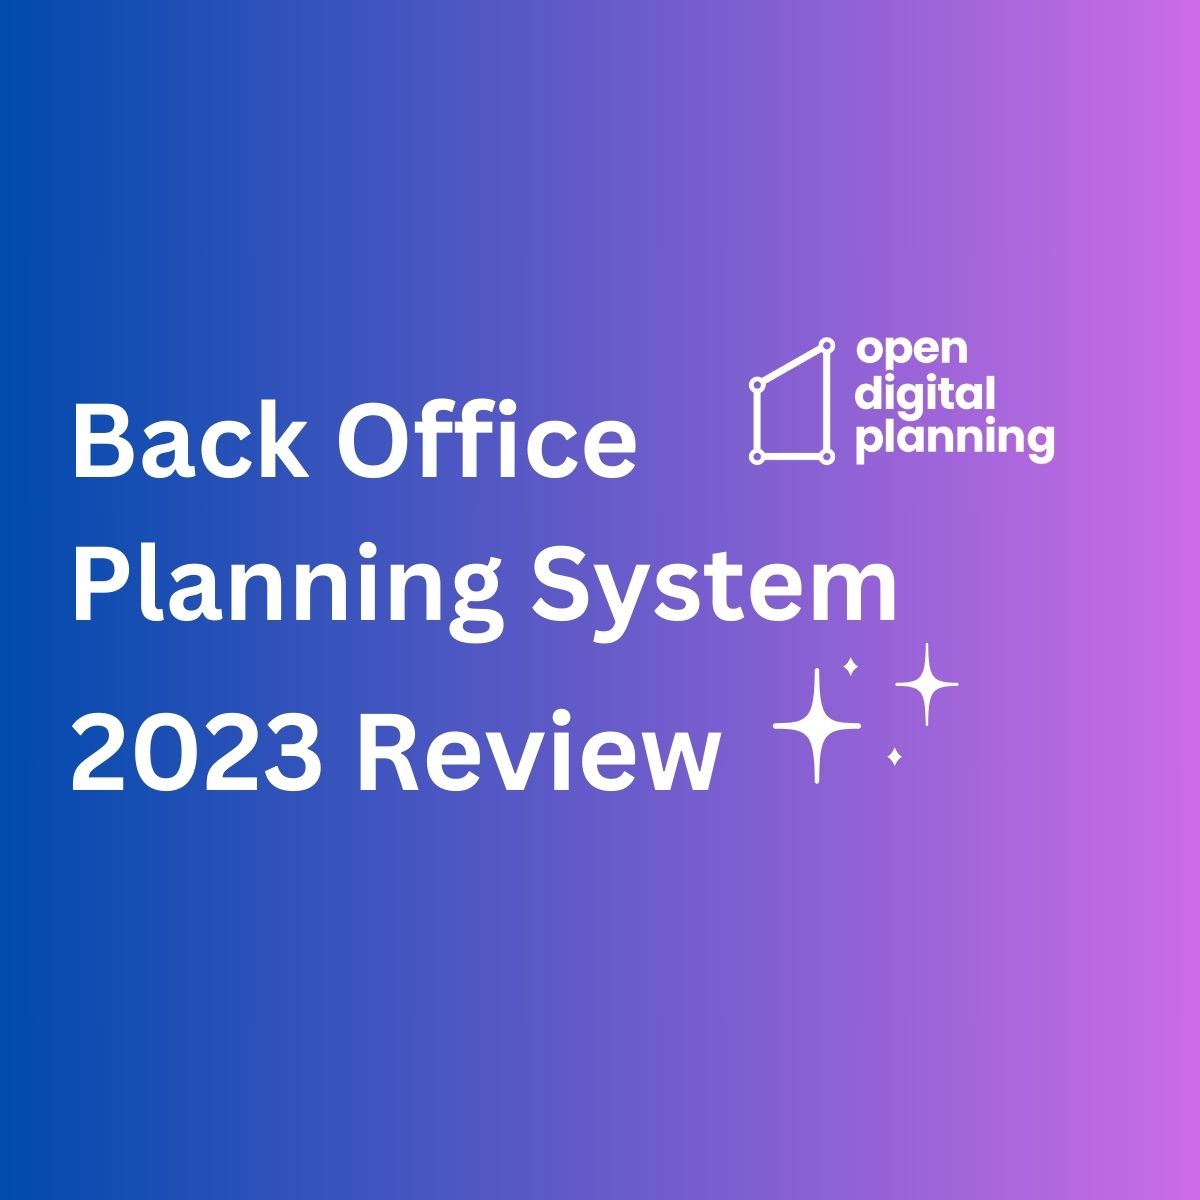 Back Office Planning System 2023 Review